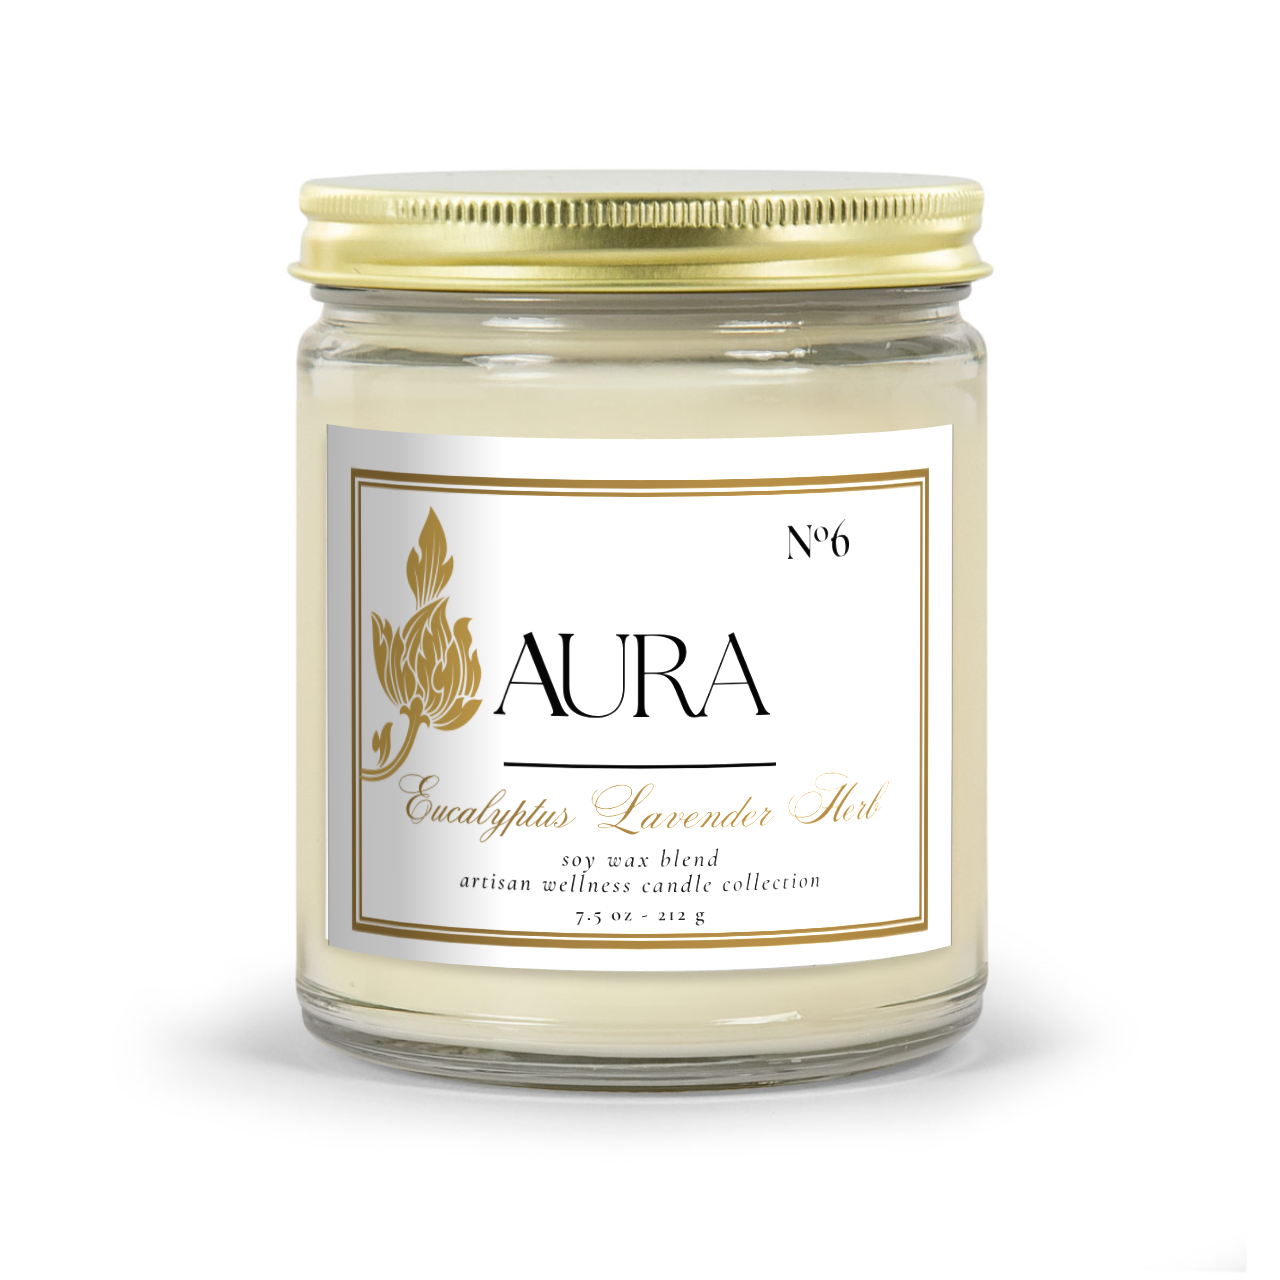 Aromatherapy Candle - Aura Aromas Artisan Wellness Candle Collection:  Classic Amber Or Classic Clear Vessel Eucalyptus Lavender Herb Scent